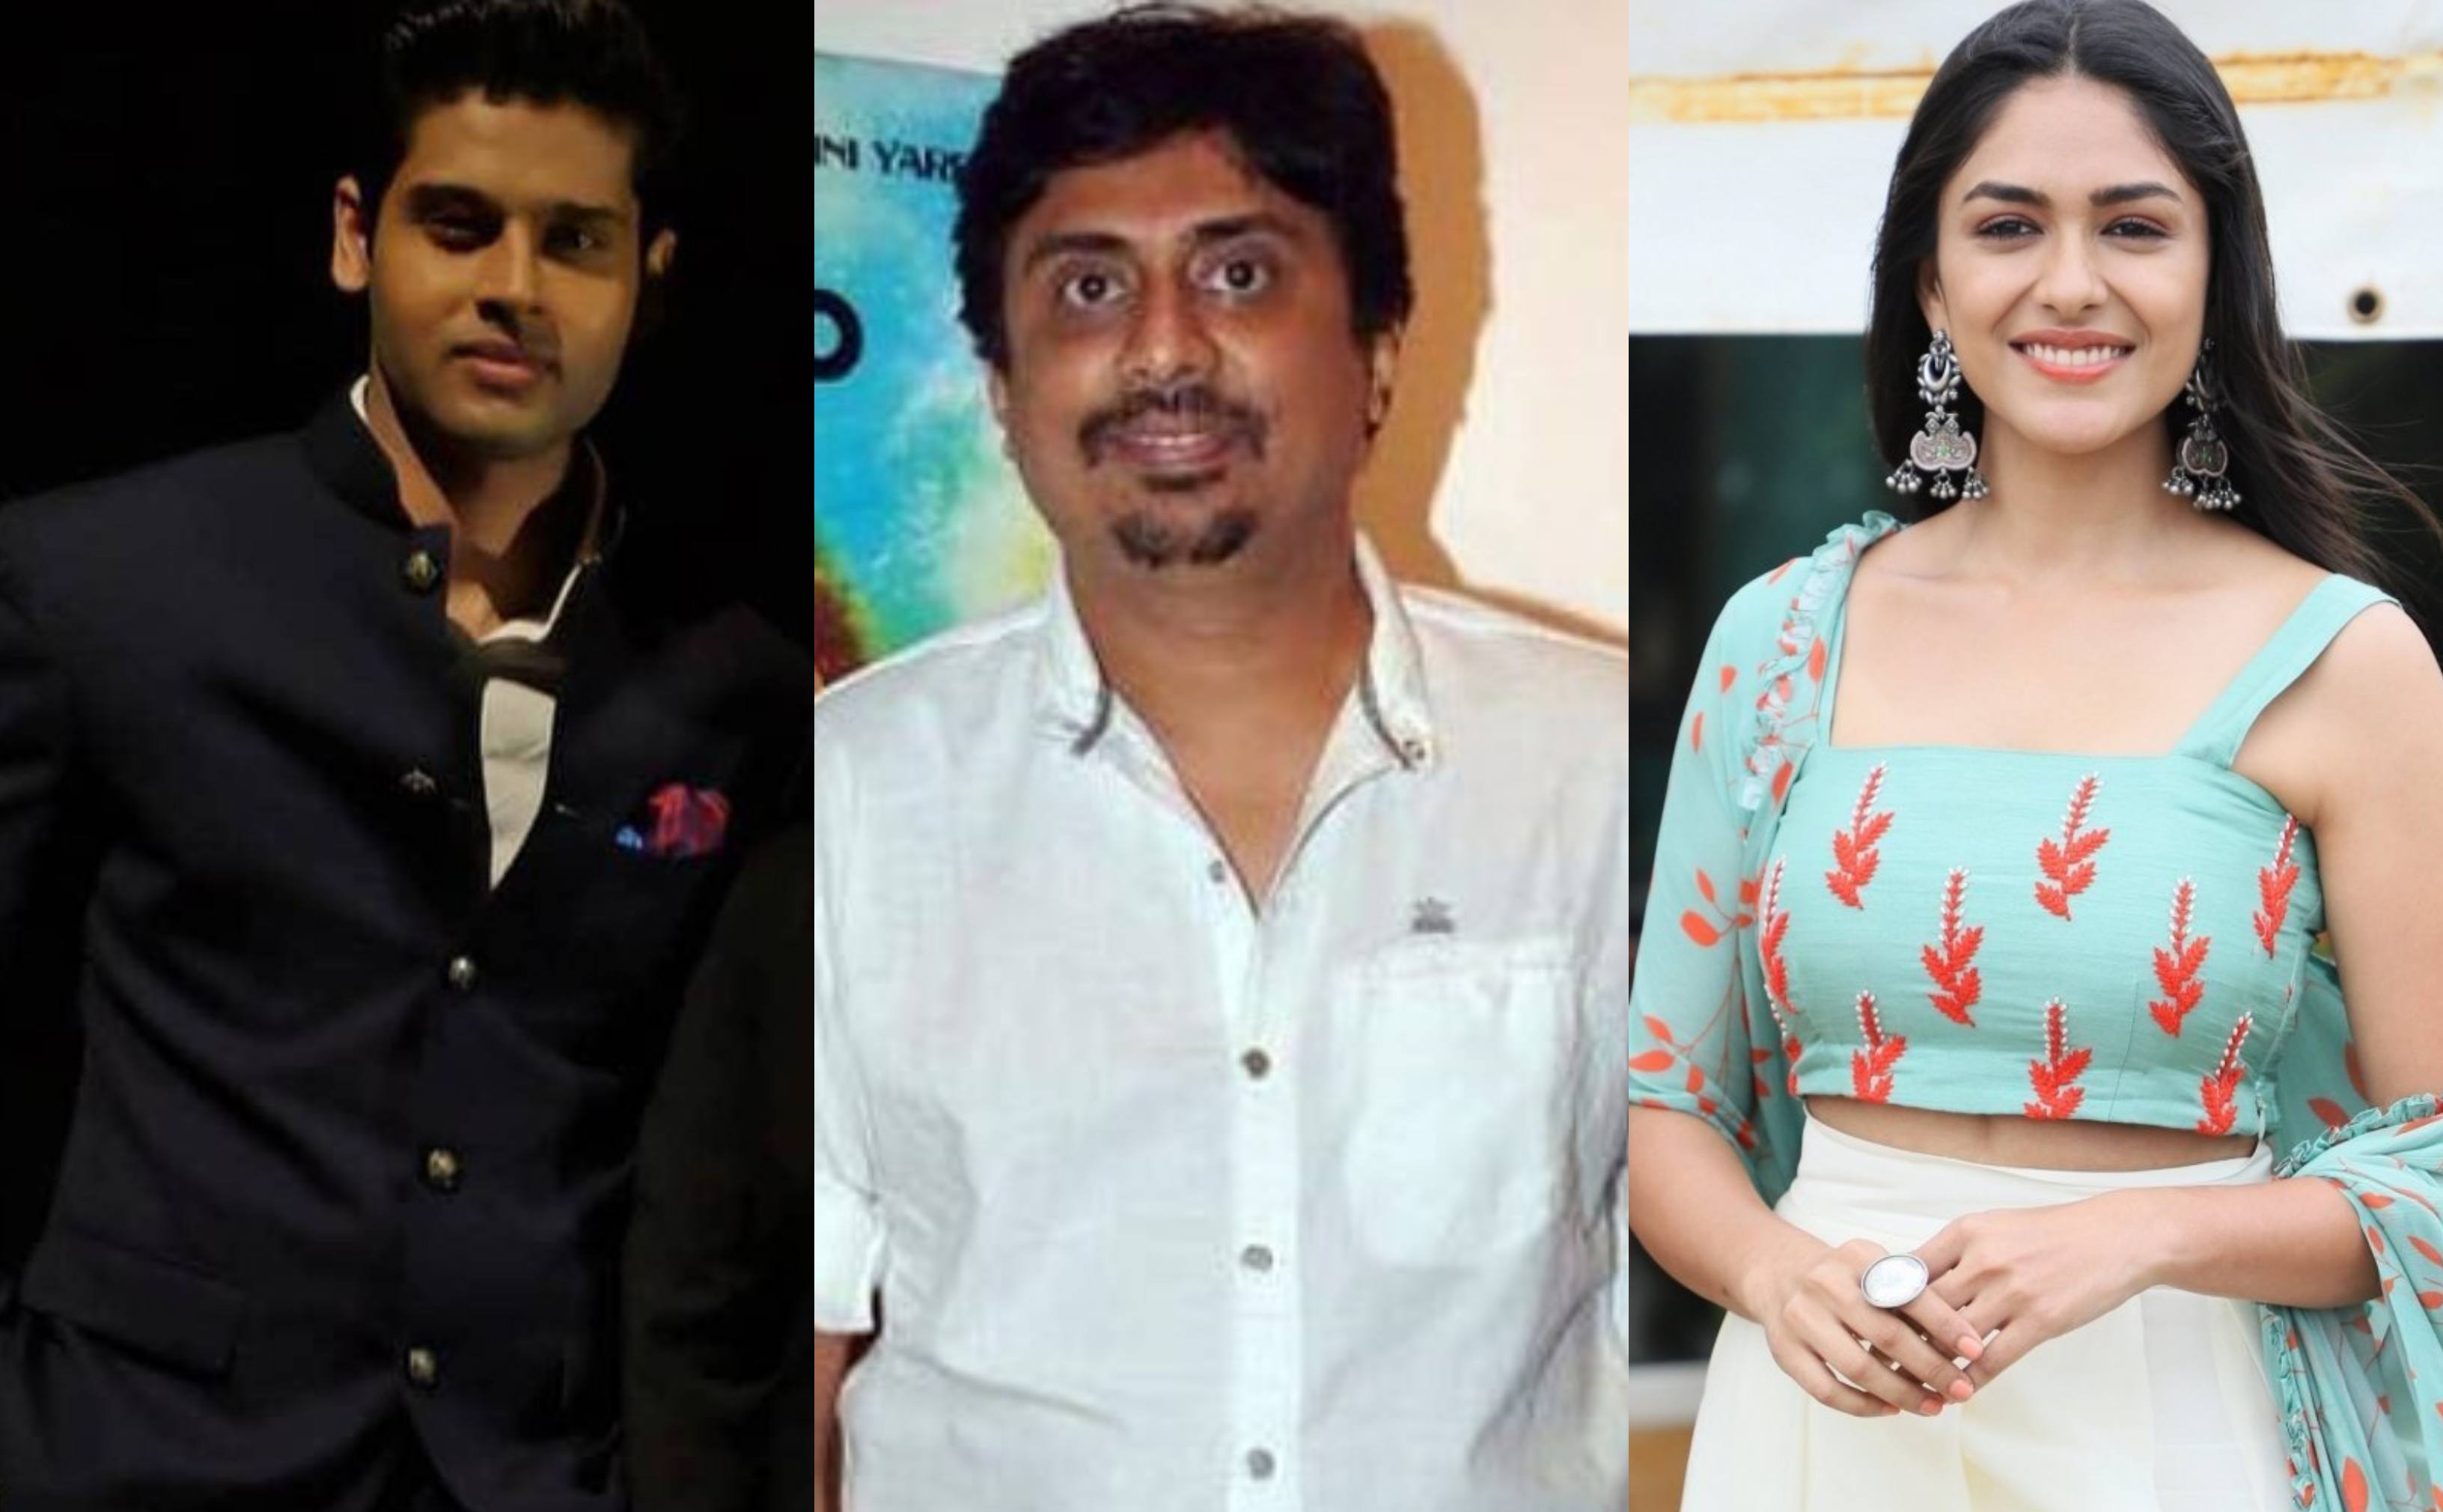 Umesh Shukla’s Namune To Feature These Actors?